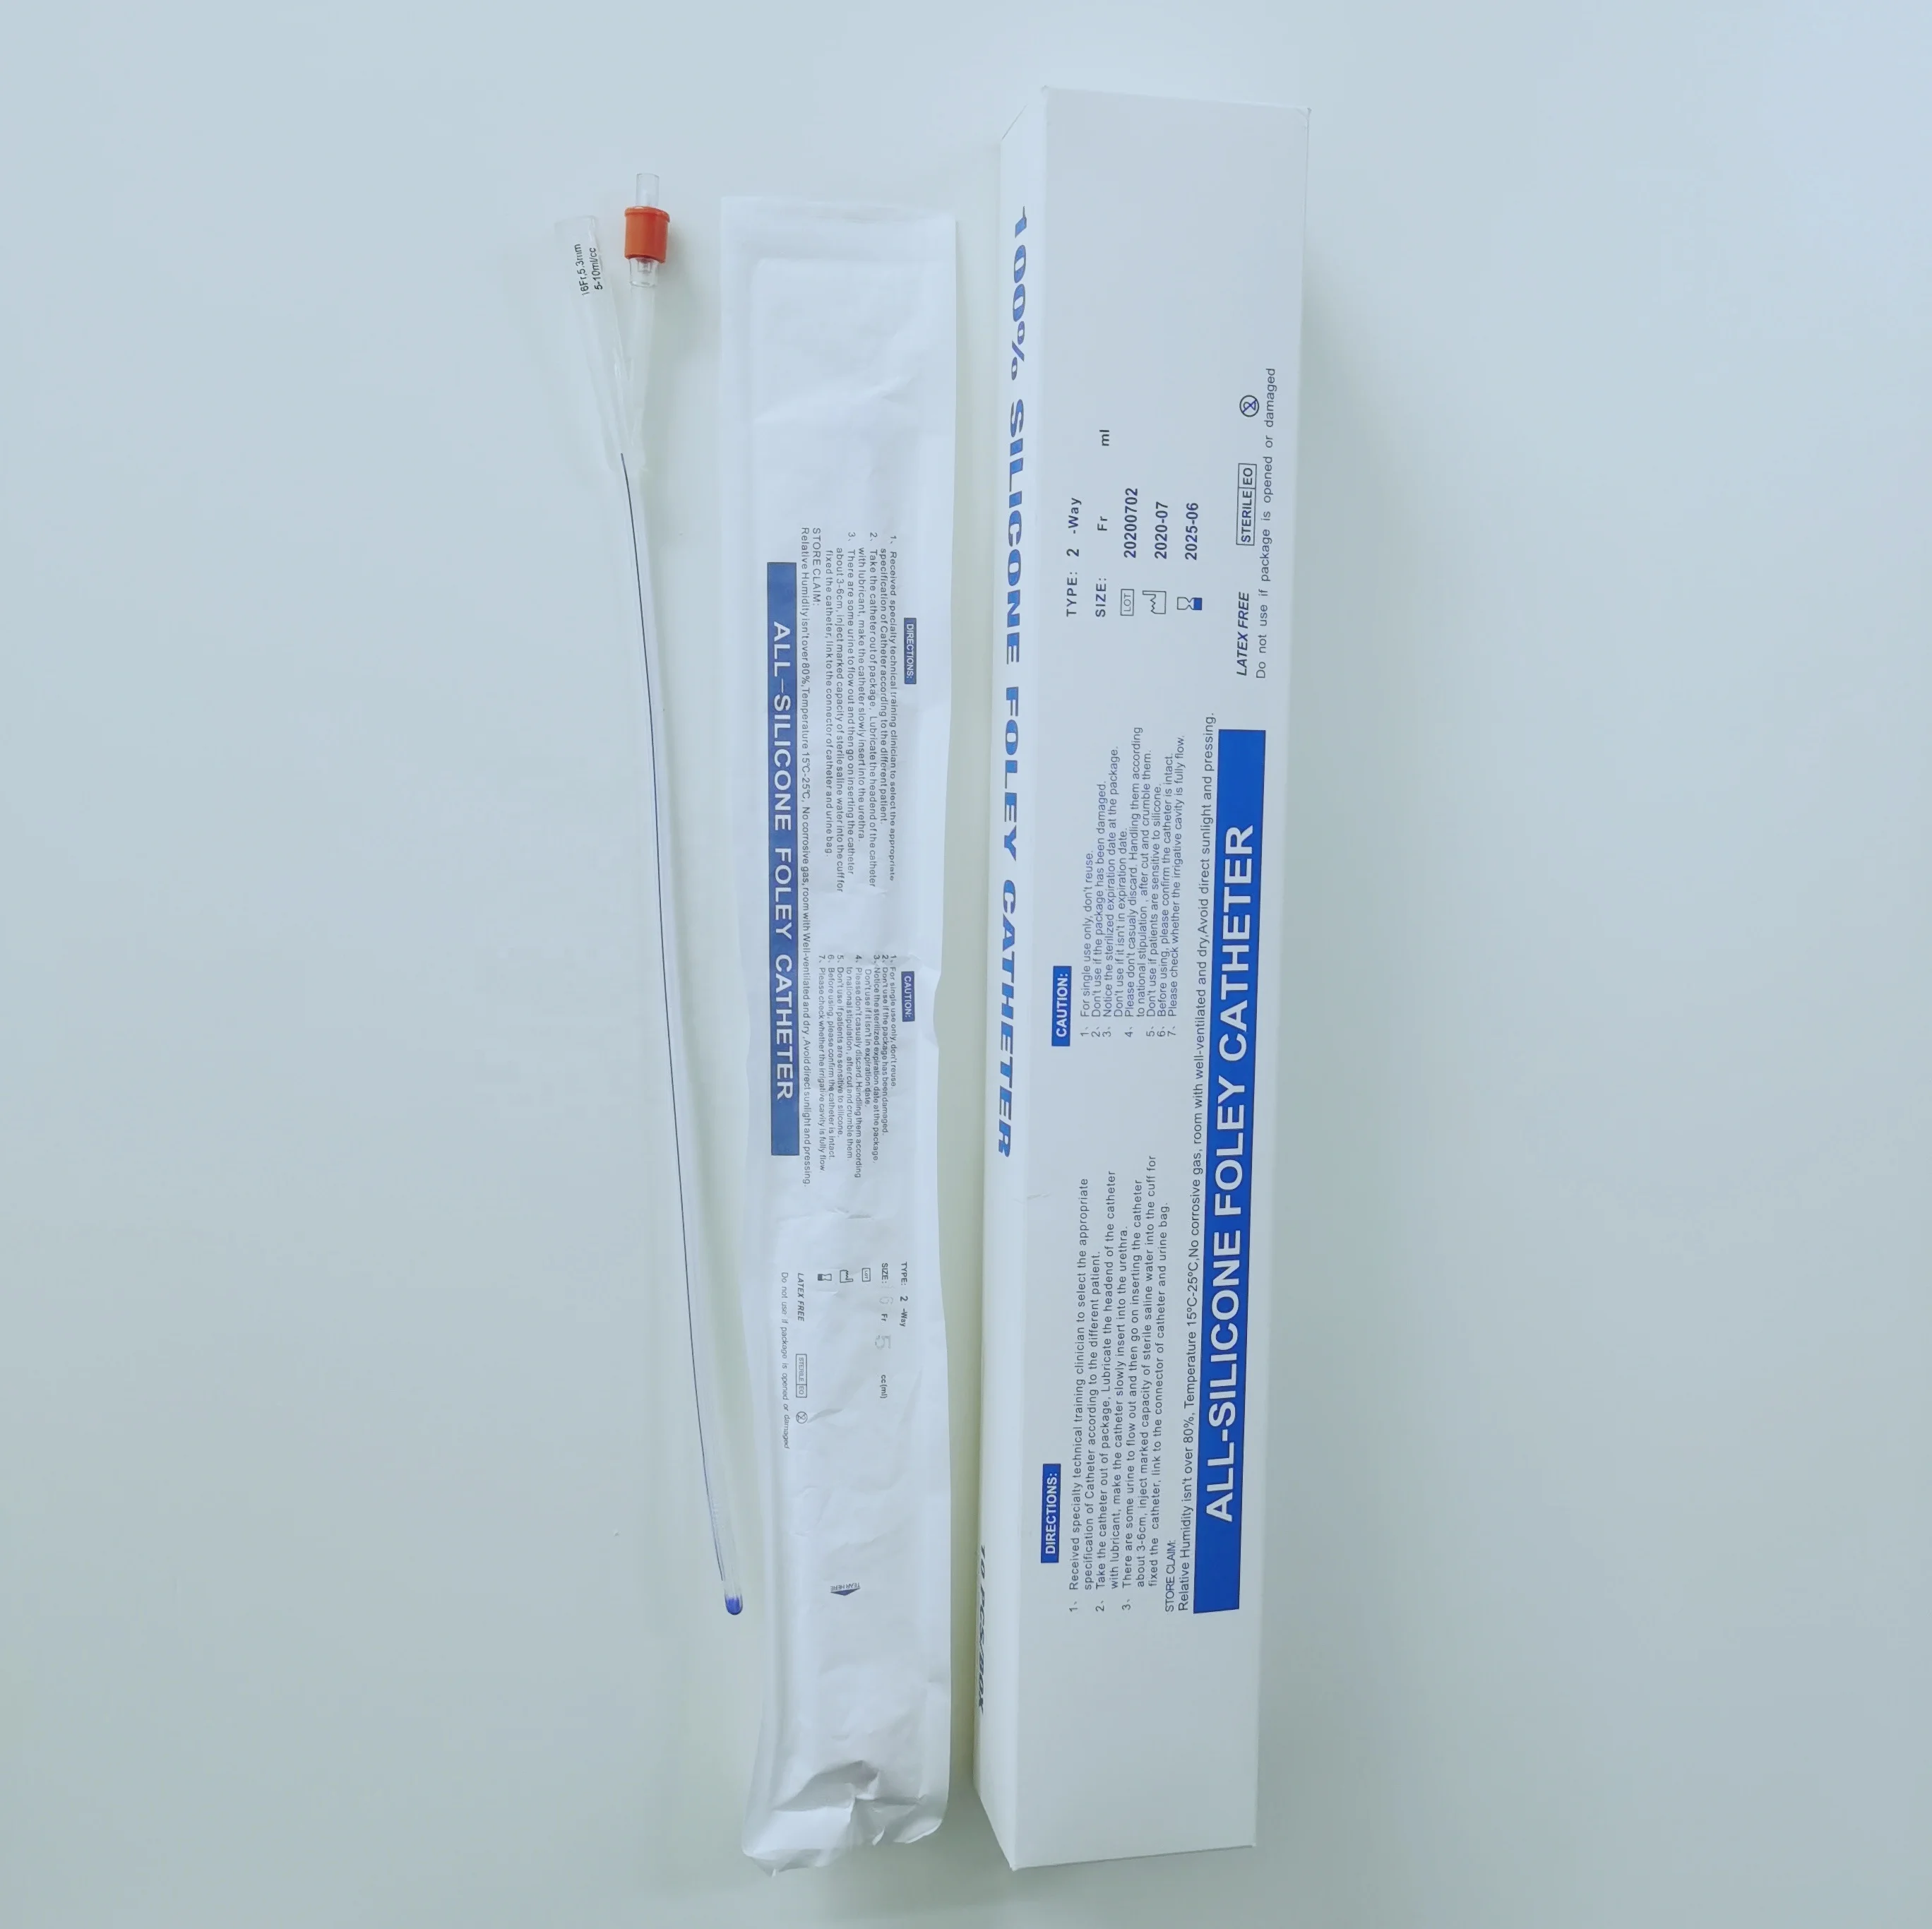 factory price silicone Foley catheter produced by China manufacturer with all medical grade silicone high quality